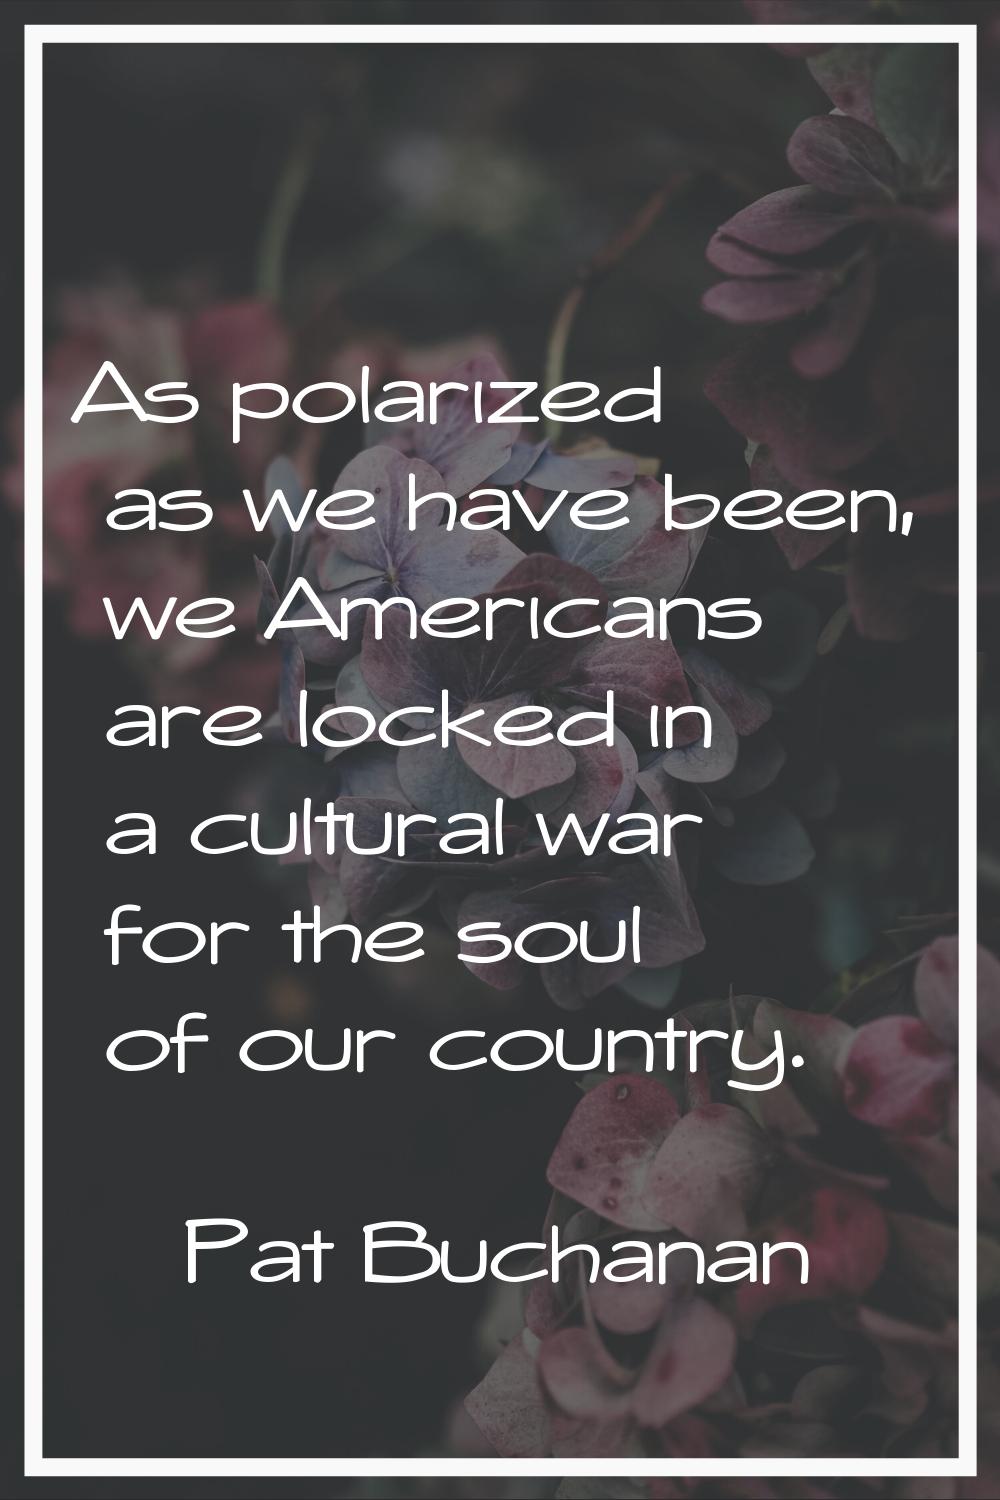 As polarized as we have been, we Americans are locked in a cultural war for the soul of our country